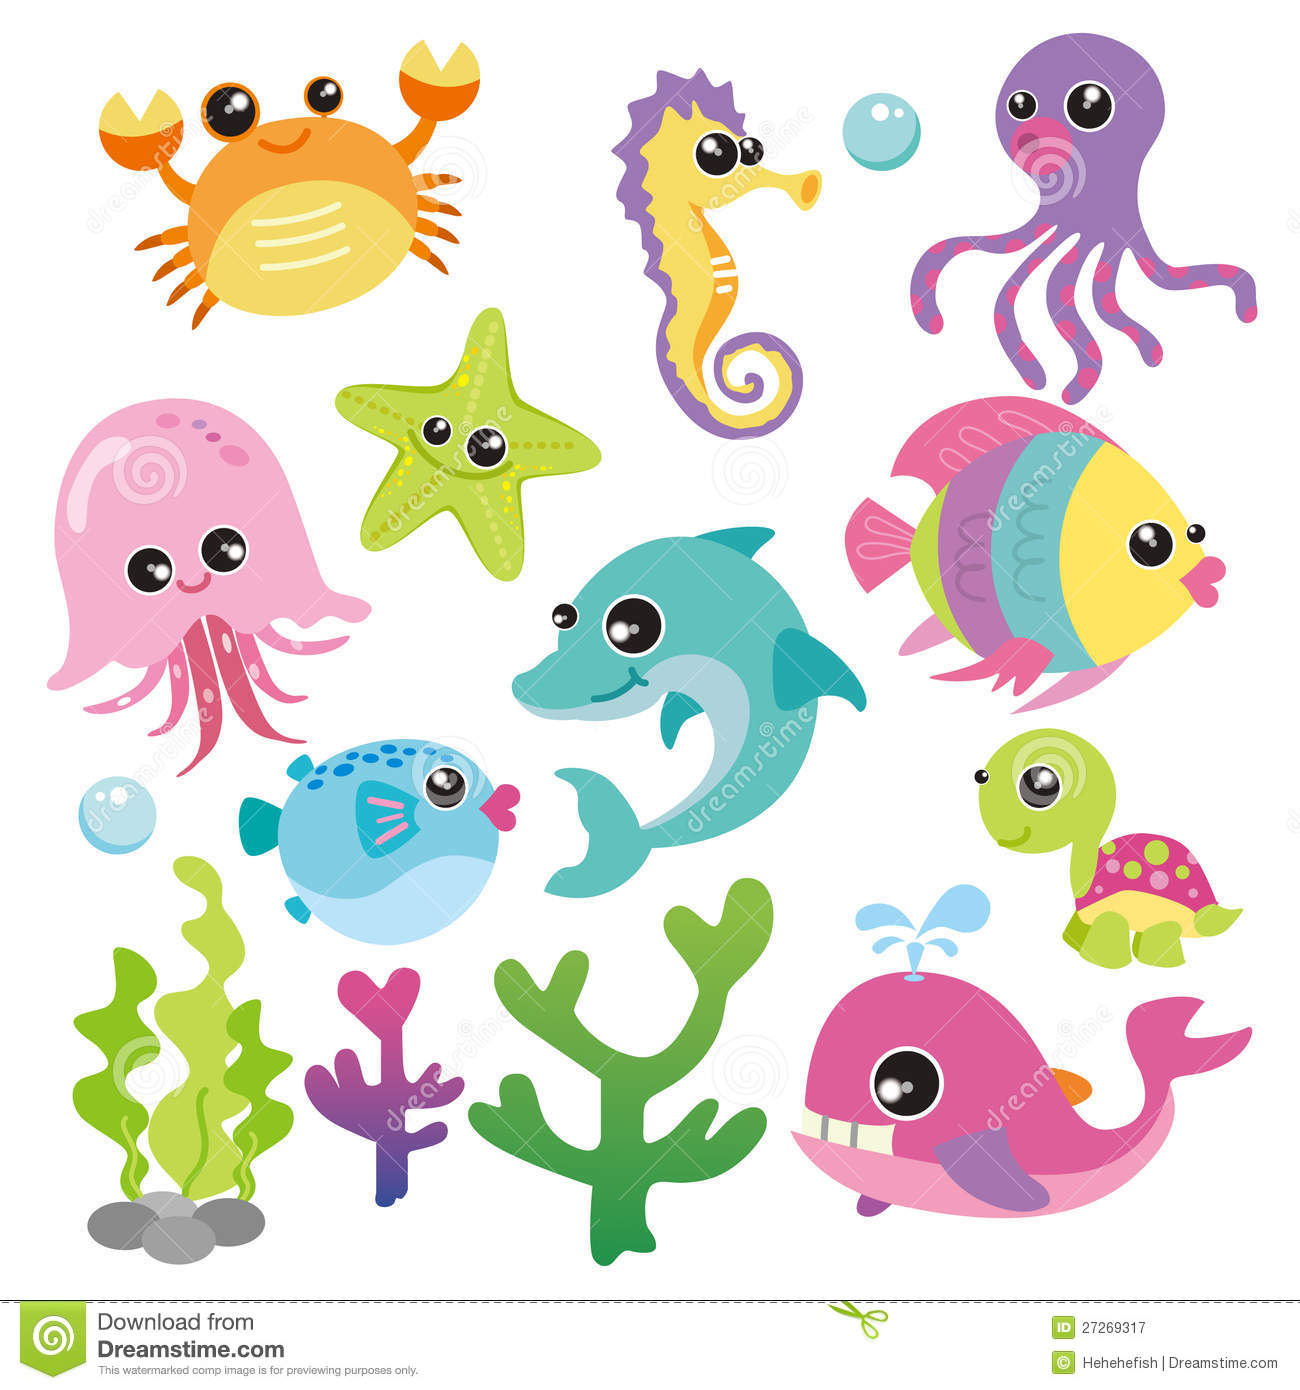 Baby Sea Creatures Royalty Free Stock Photography.